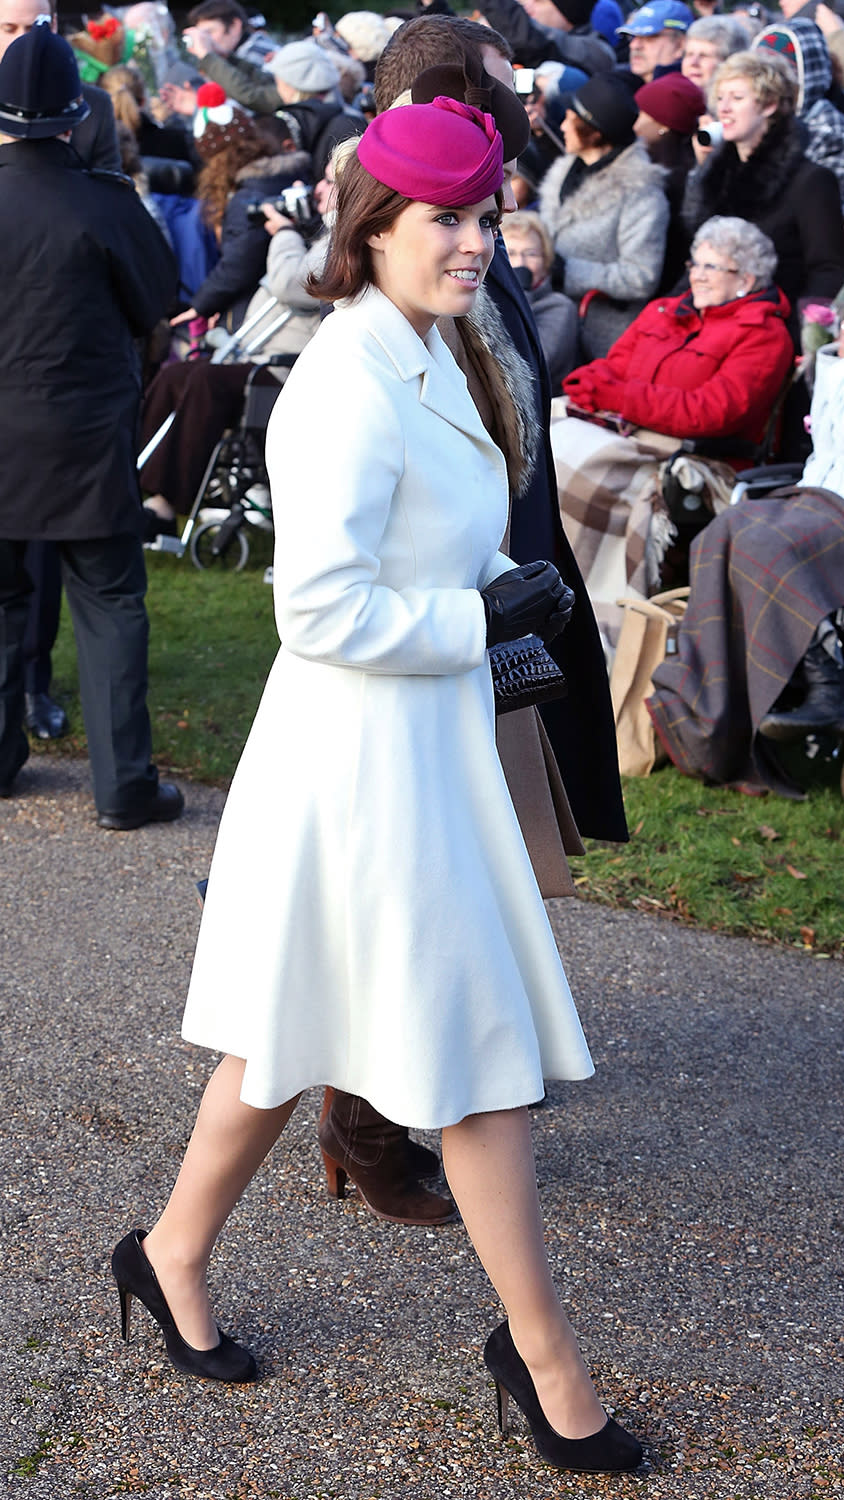 WHITE COAT AND PINK HAT